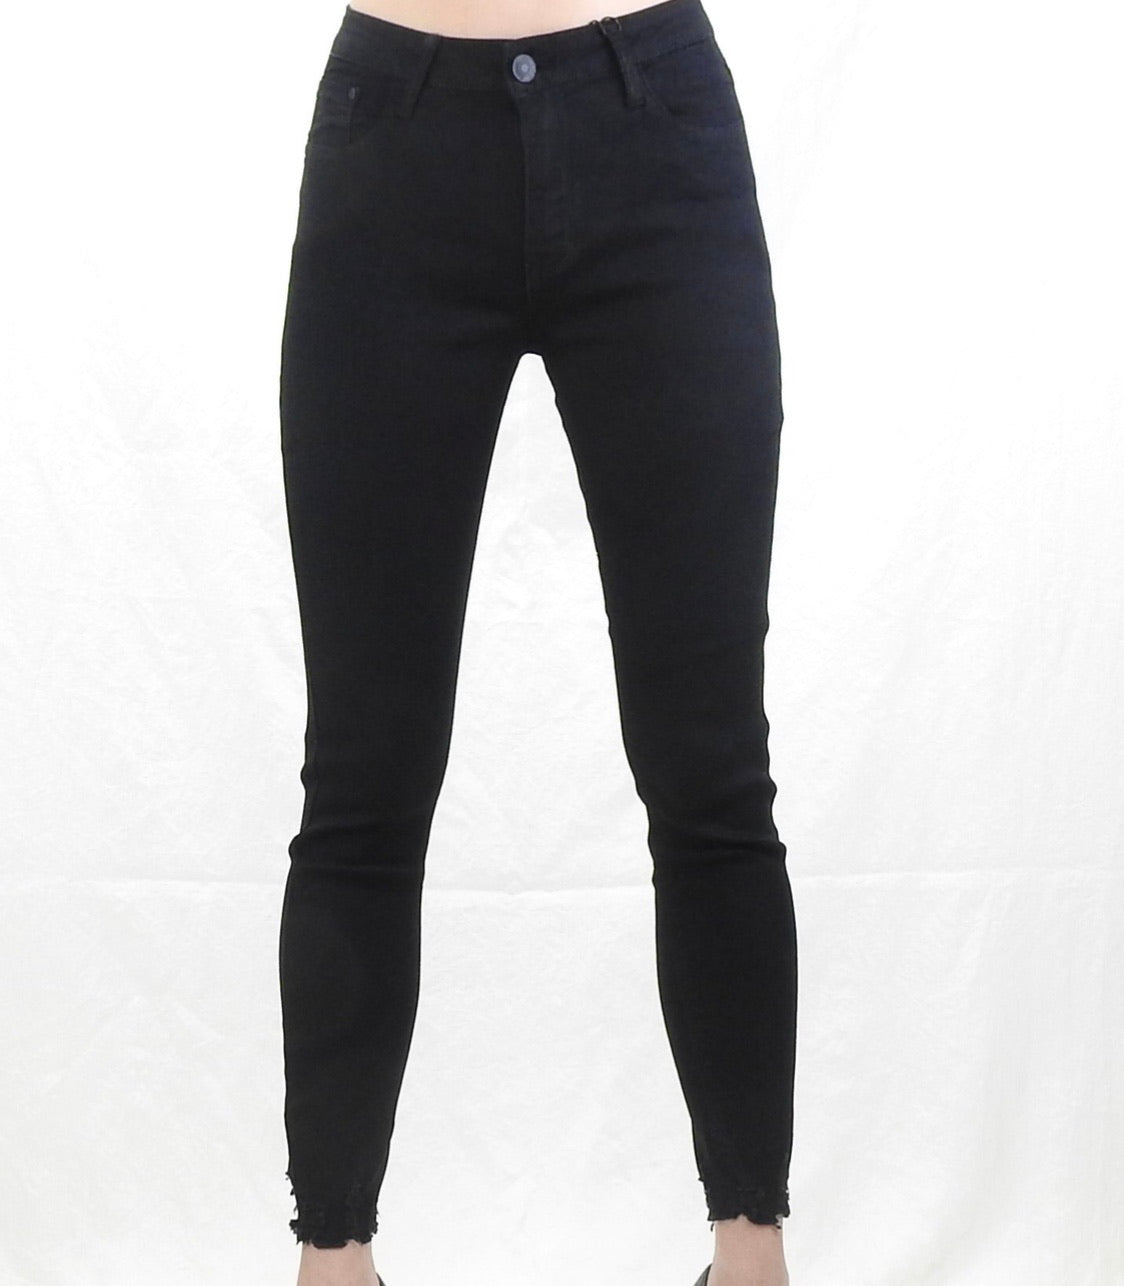 Best Jeans Ever - Black no rips